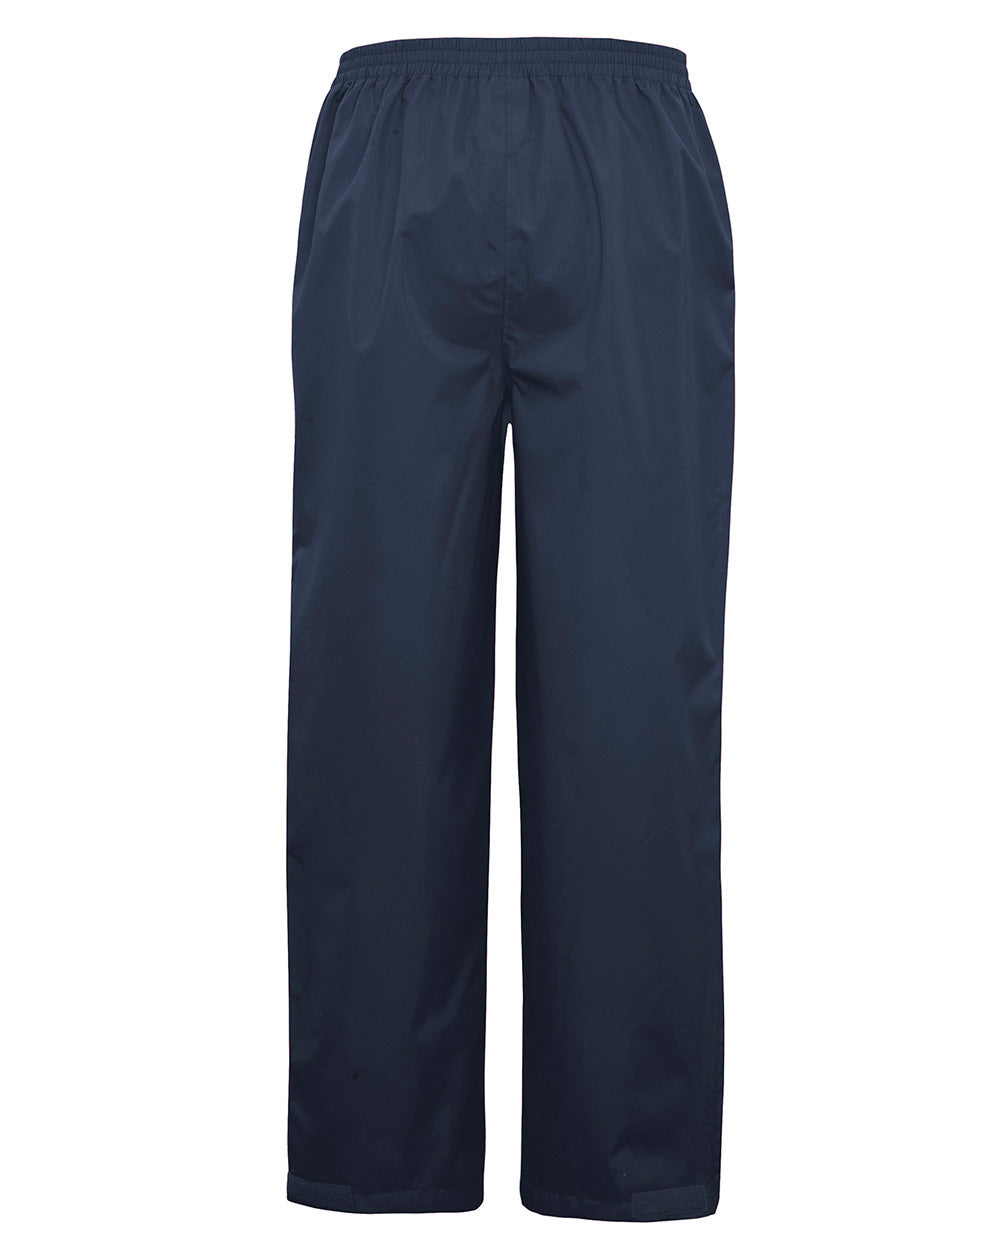 Ultimate Overpant in Navy